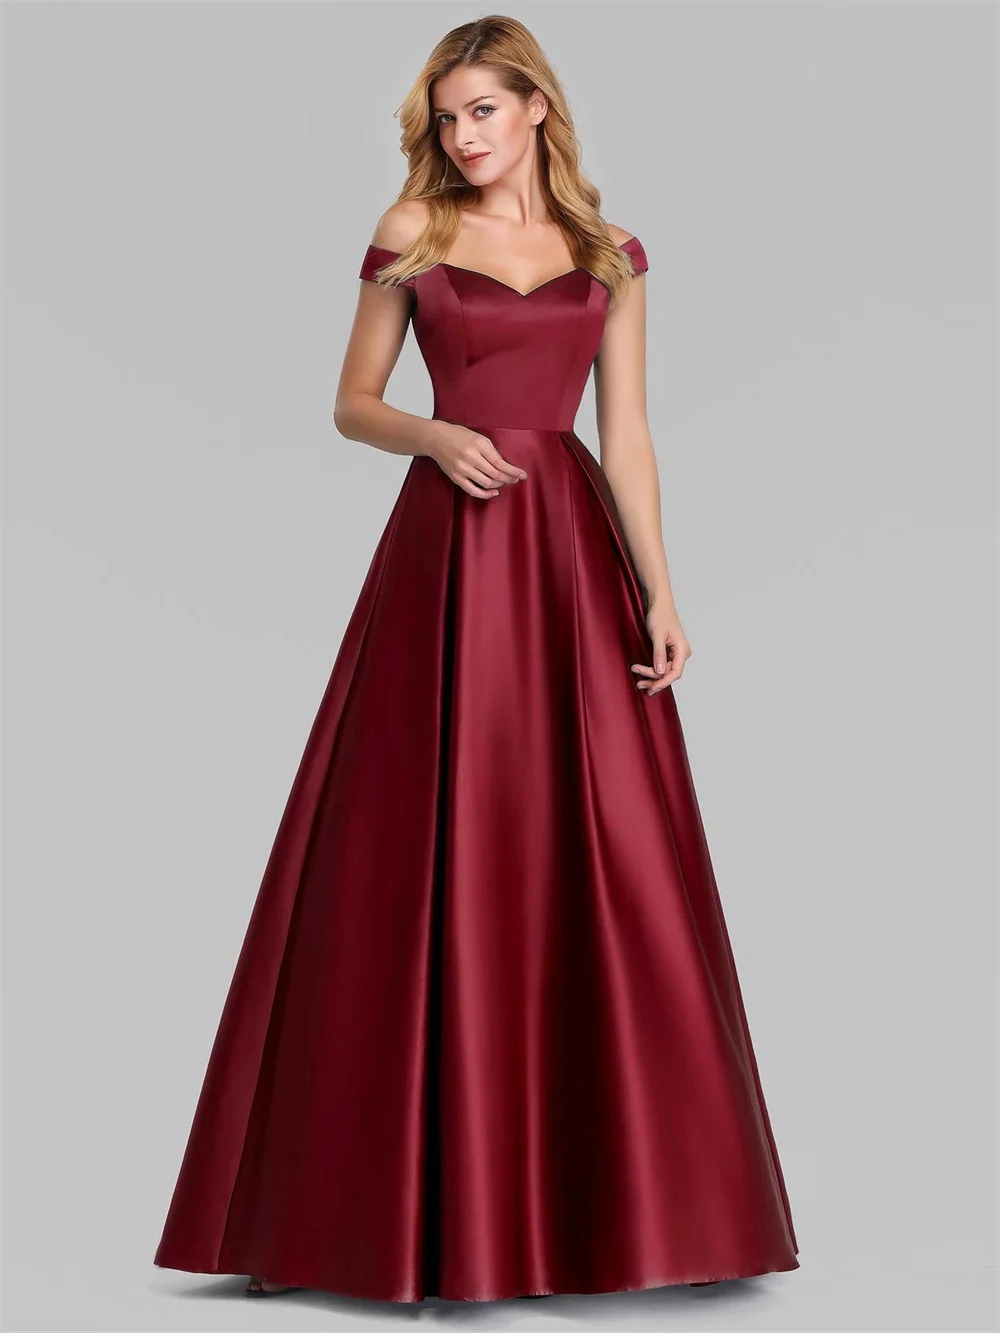 Elegant Women Evening Party Dress 2023 New in Sexy V-neck High Waist Maxi Gowns Ladies Boutique Prom Quinceanera Dresses mandylandy women s sexy color gradient evening party dress ladies elegant sleeveless v neck high waist corset prom gown